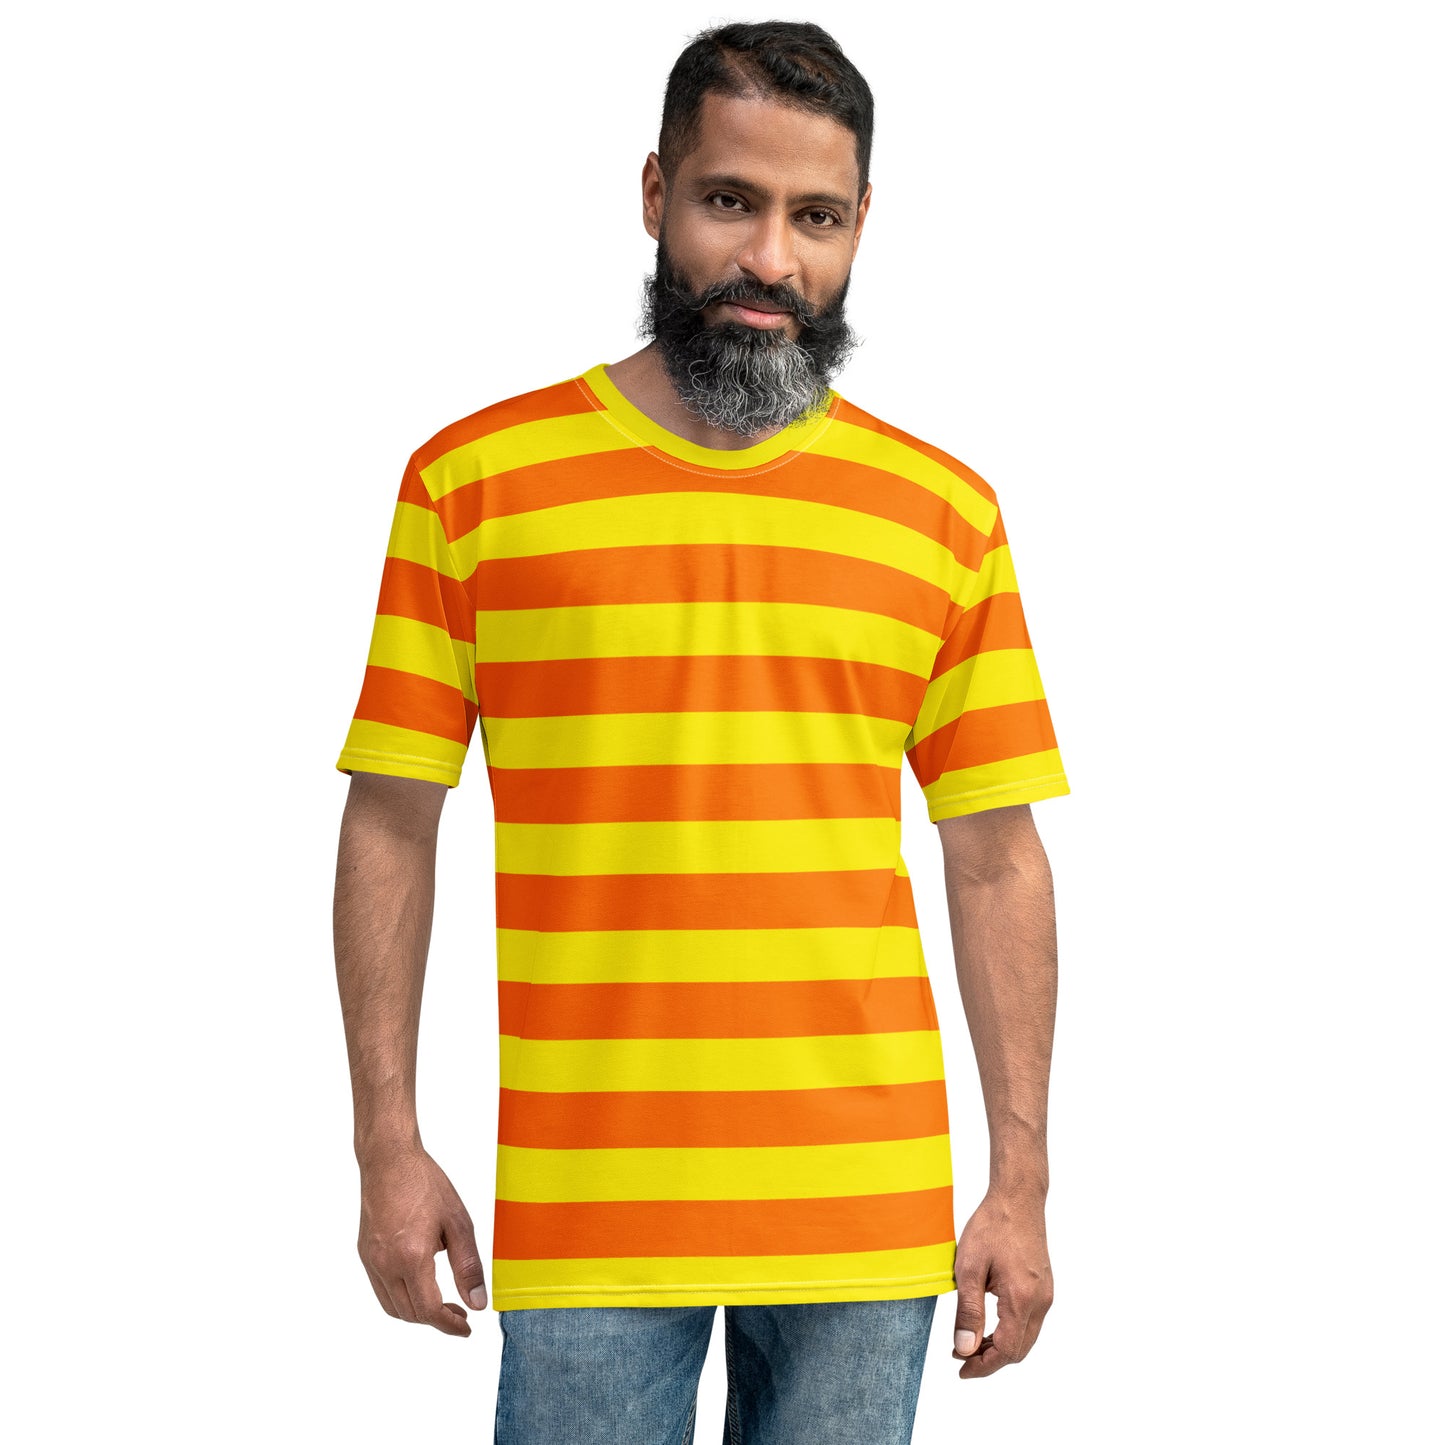 Orange and yellow striped t-shirt on a model